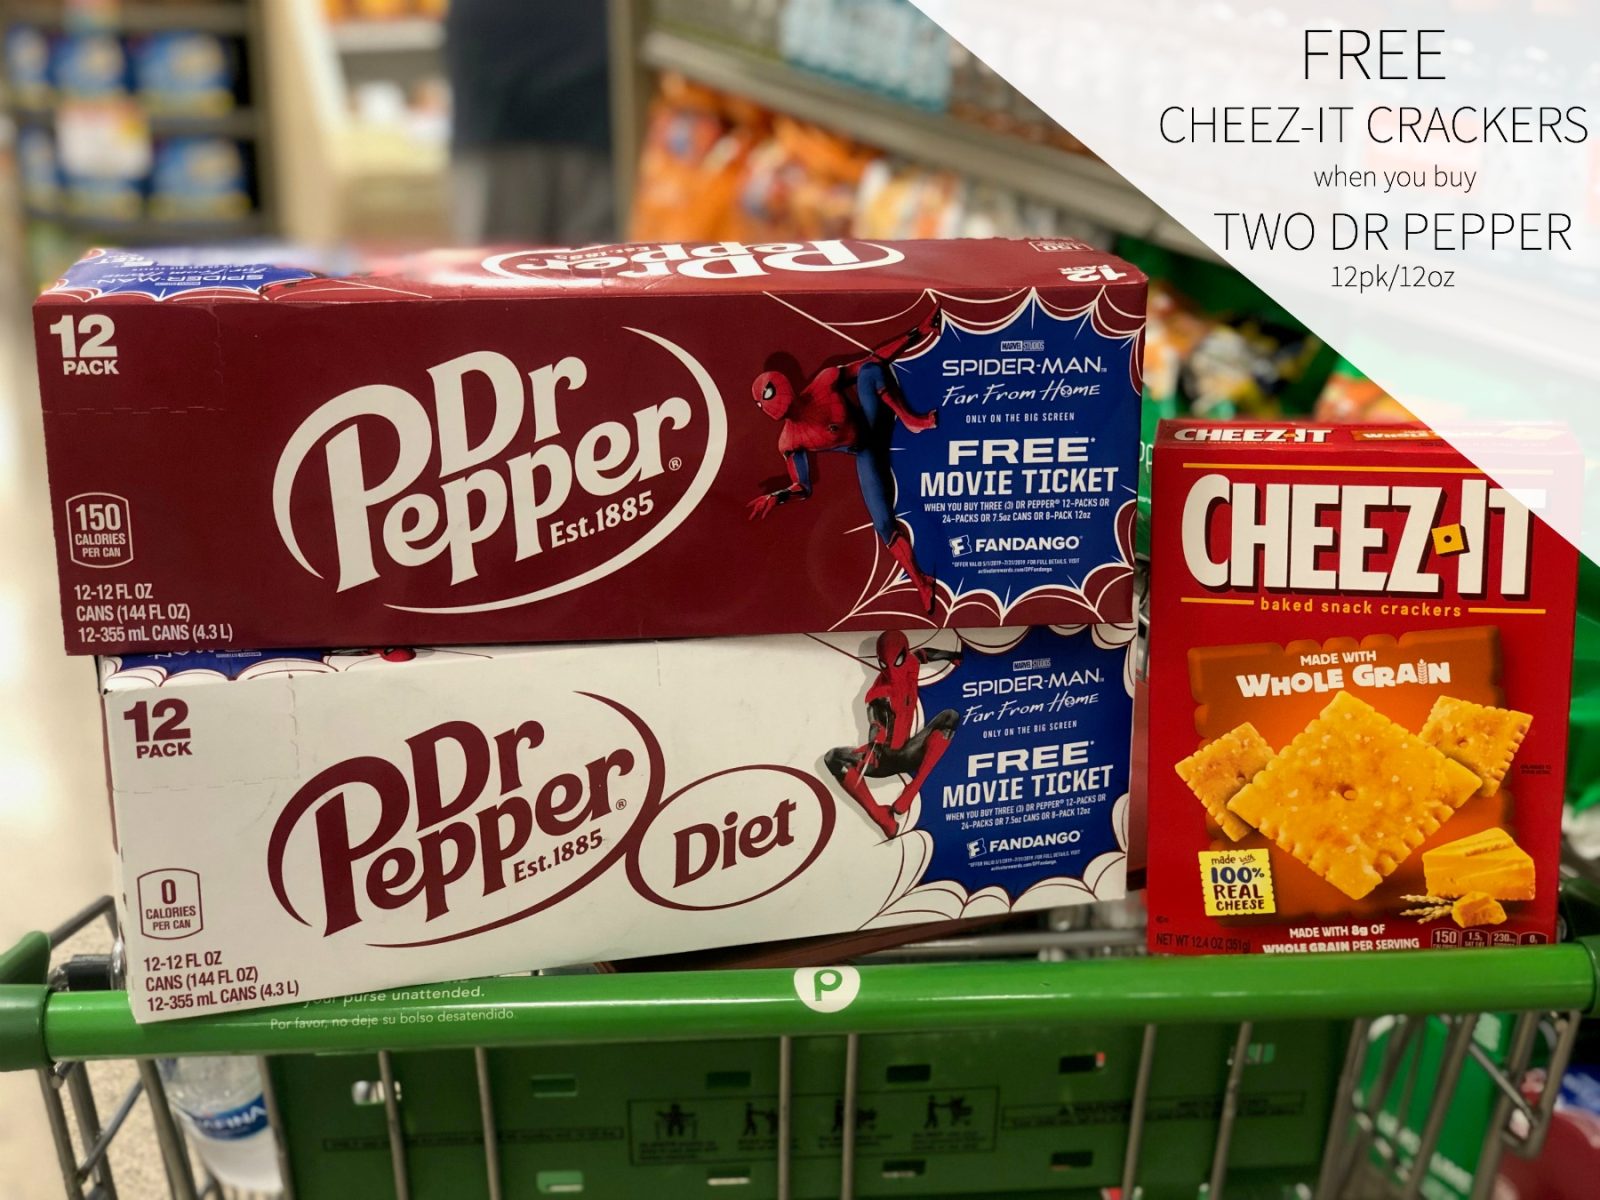 Free Cheez-It Crackers When You Buy Dr Pepper + Earn A Spider-Man: Far From Home Movie Ticket